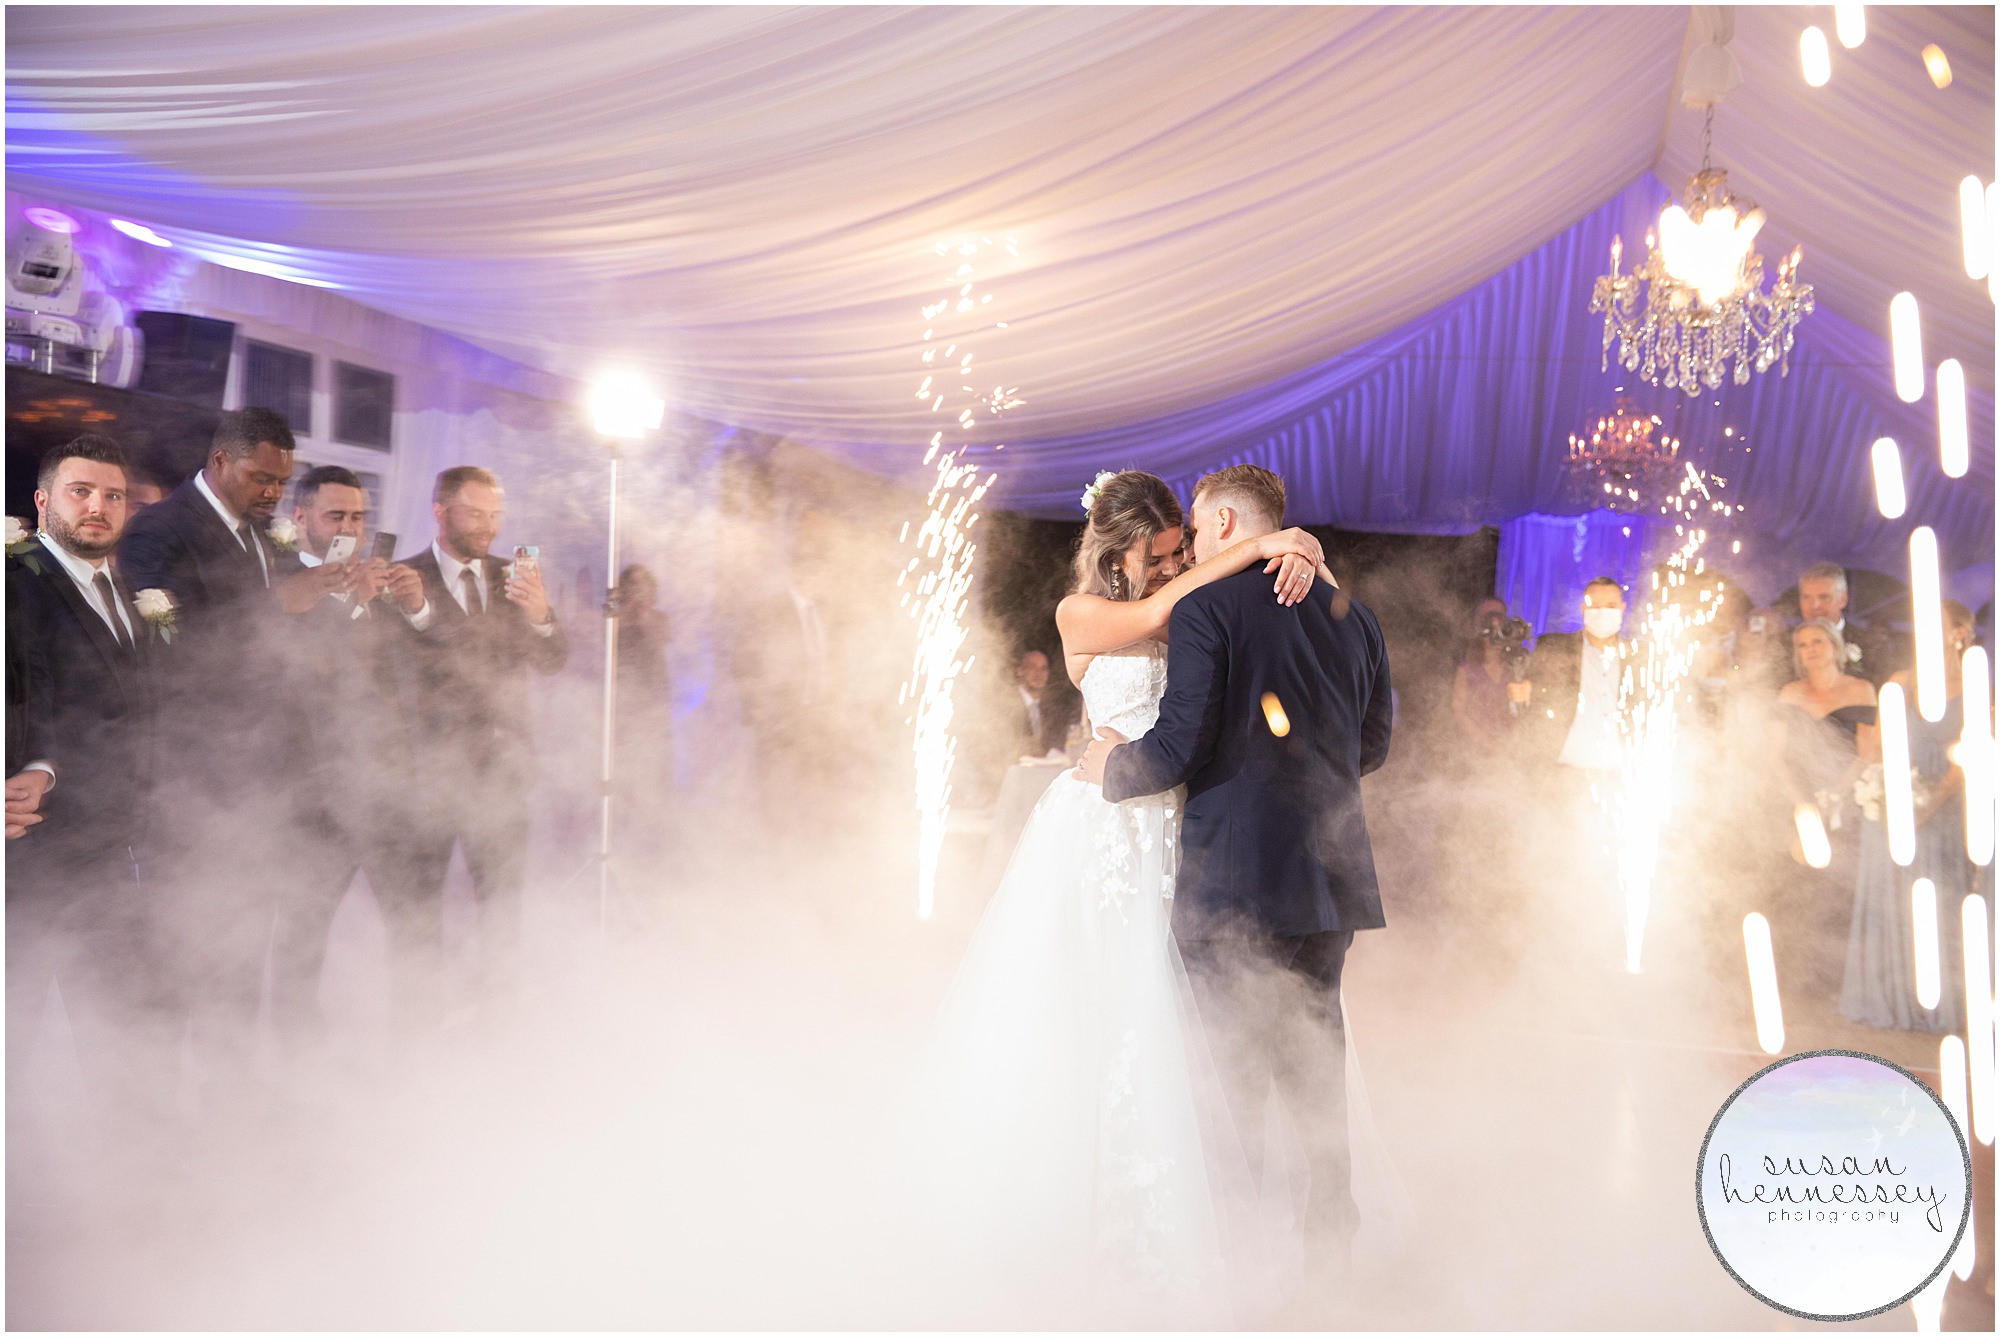 First dance in tented wedding reception